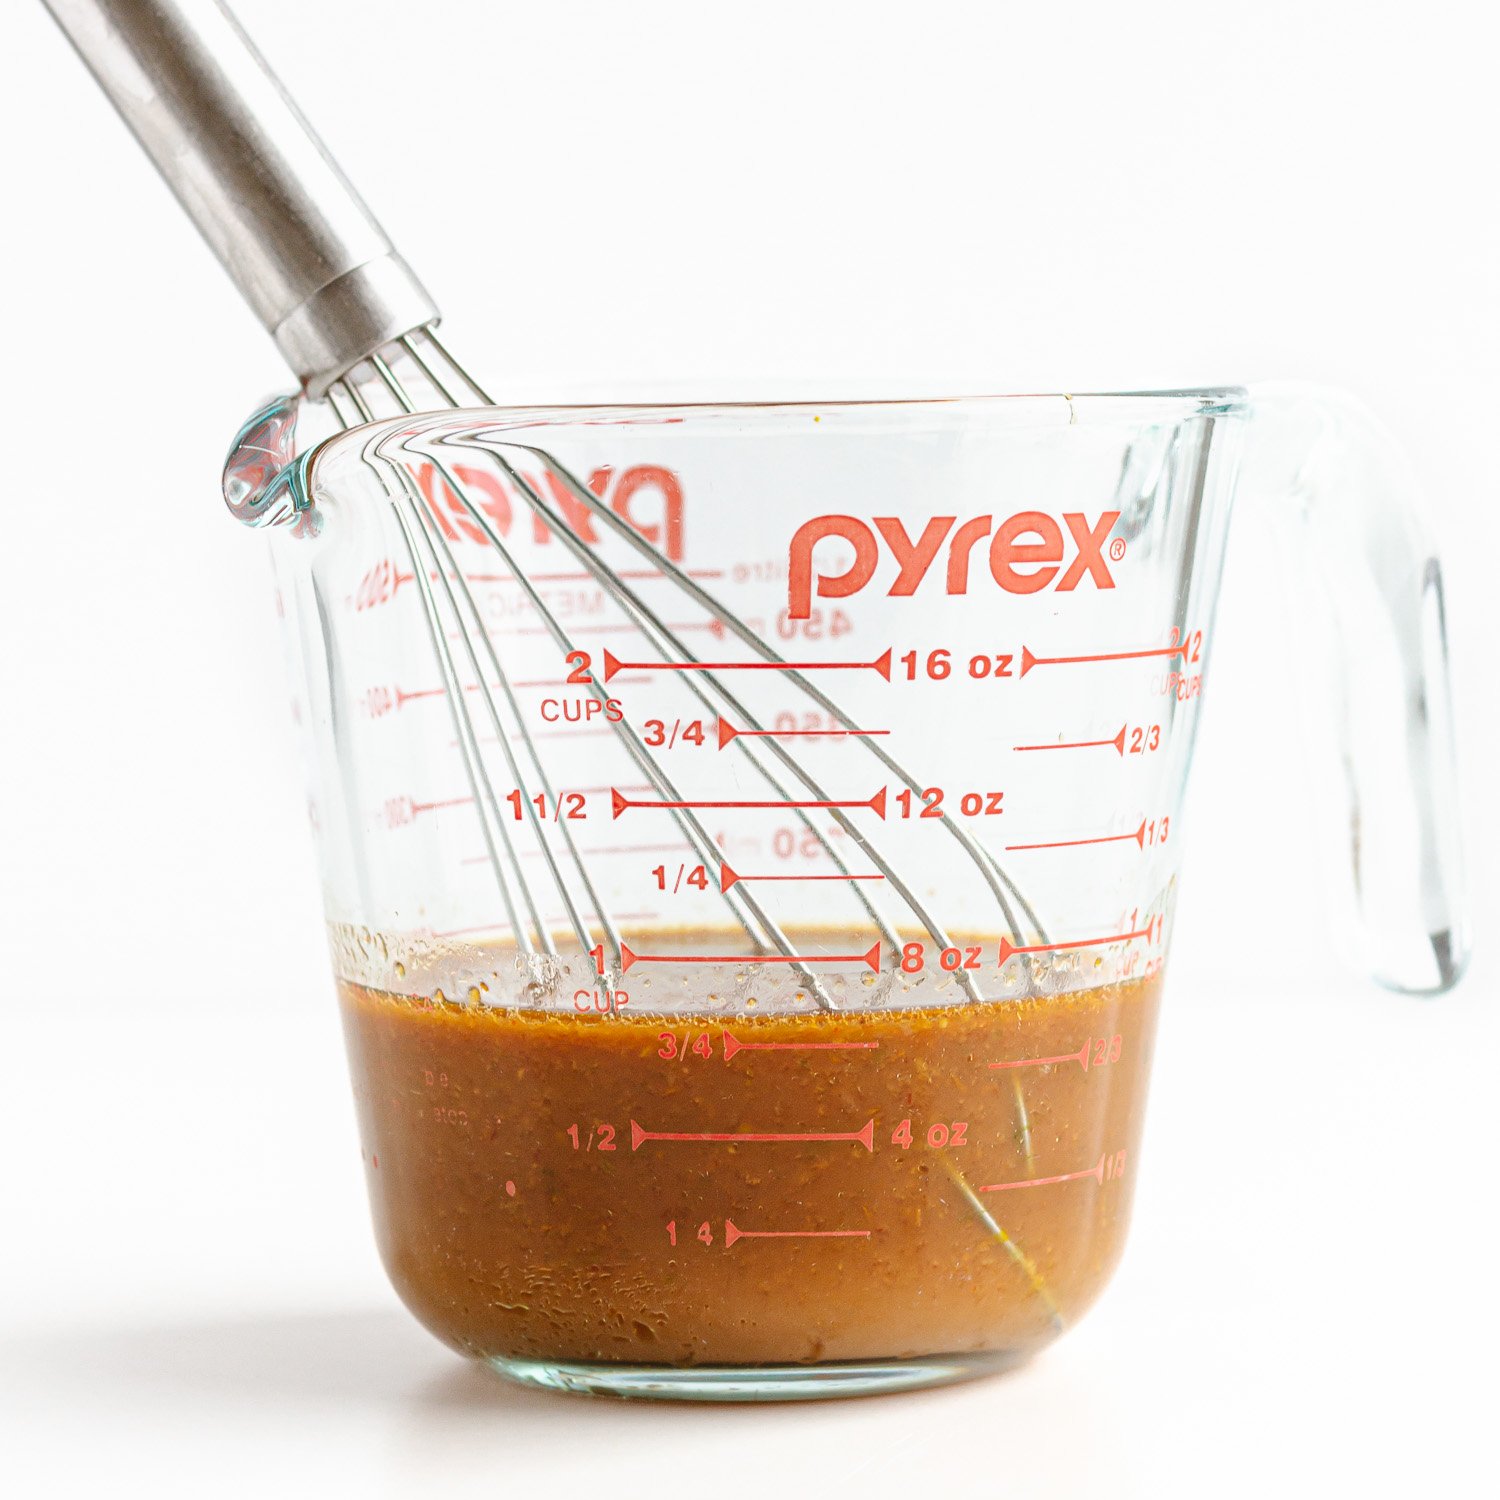 Glass measuring cup filled with homemade stir fry sauce and a whisk.